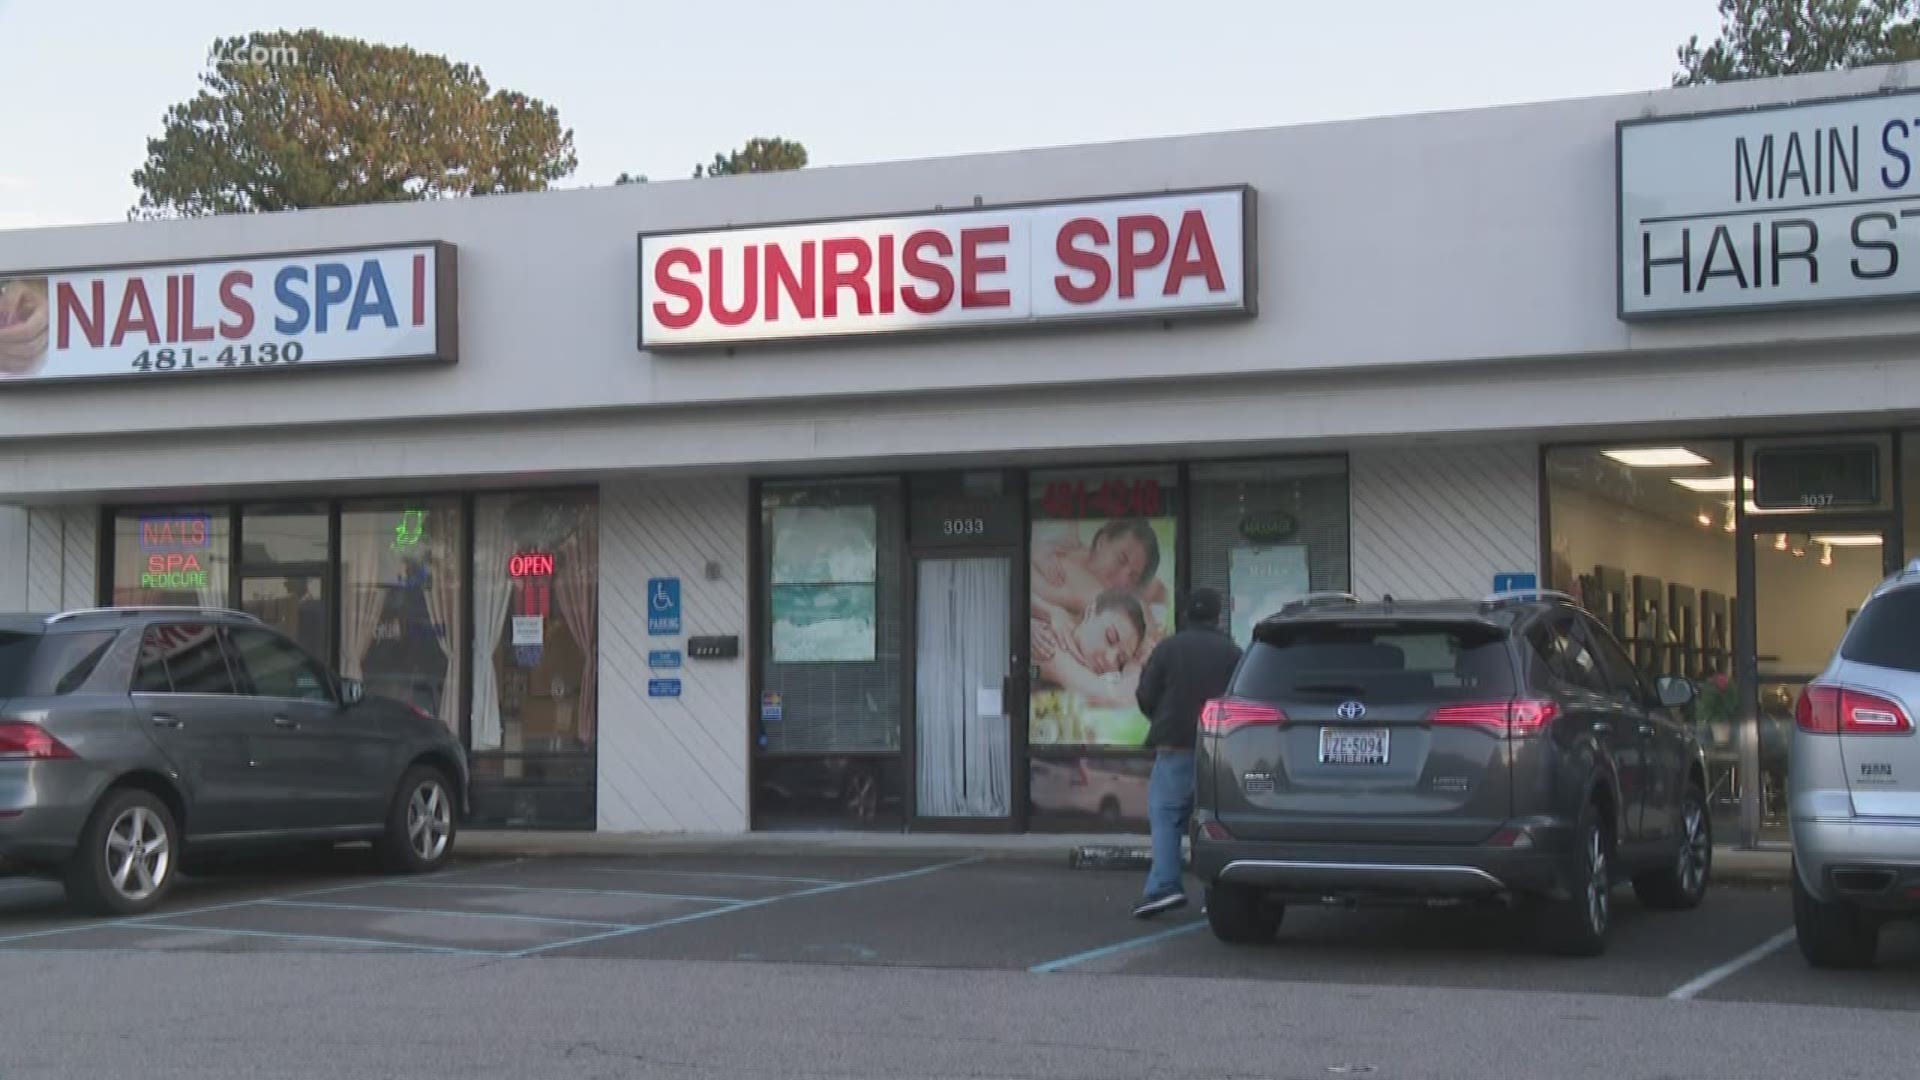 Virginia Beach police conducted an undercover operation at Sunrise Spa and documents show they found a prostitution ring. Business owners nearby weren't surprised.